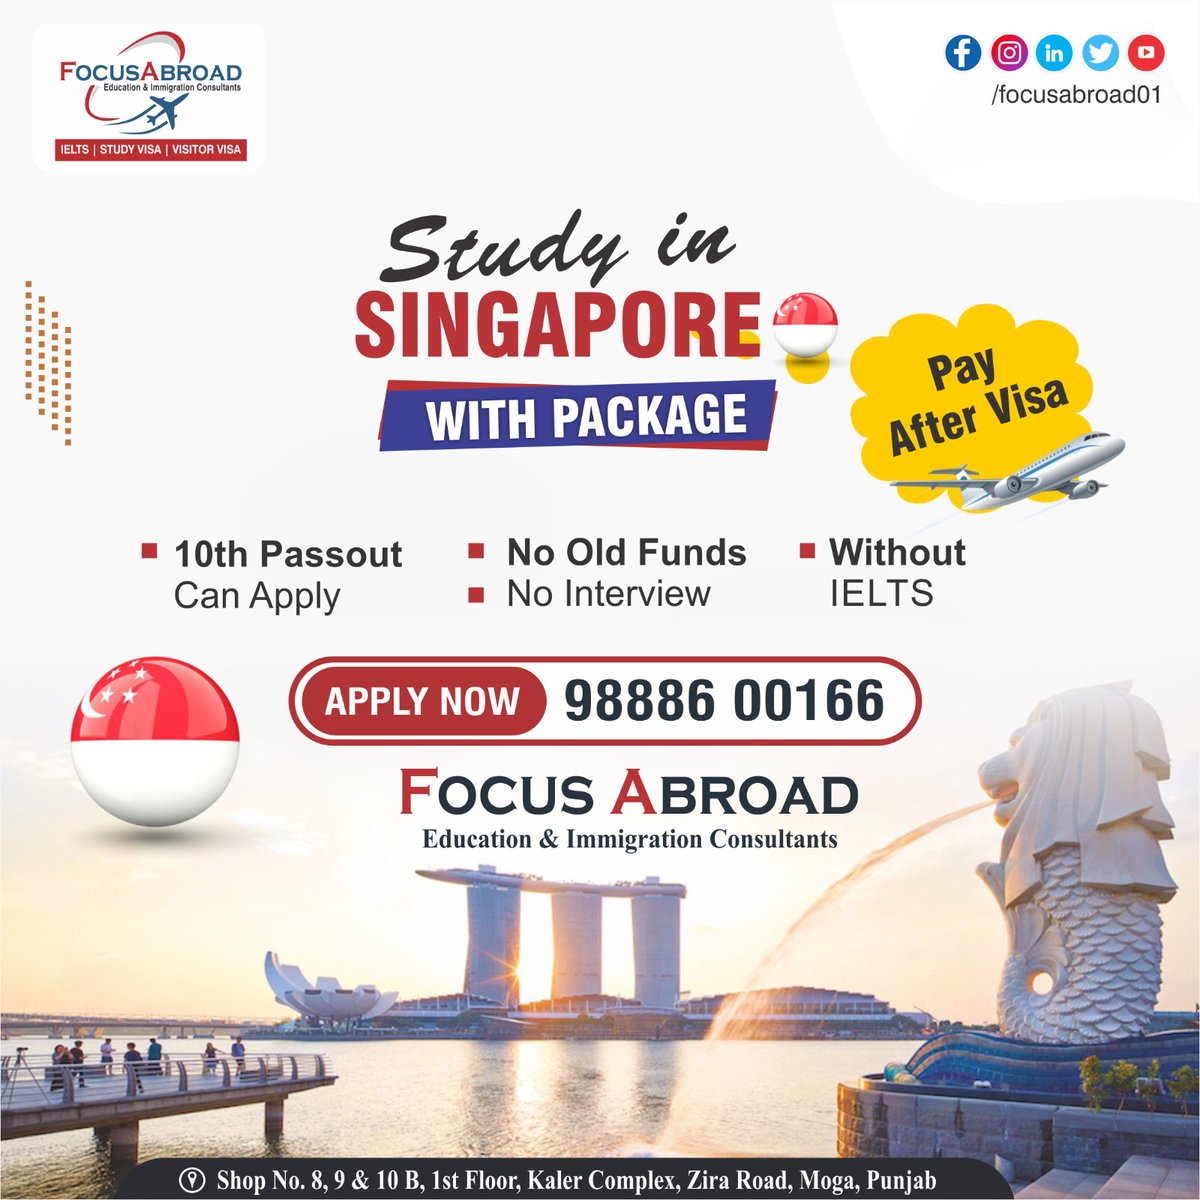 Study in Singapore with package 
& with or without ielts
#studyinsingapore #studentvisa #focusabroad01 #followformore